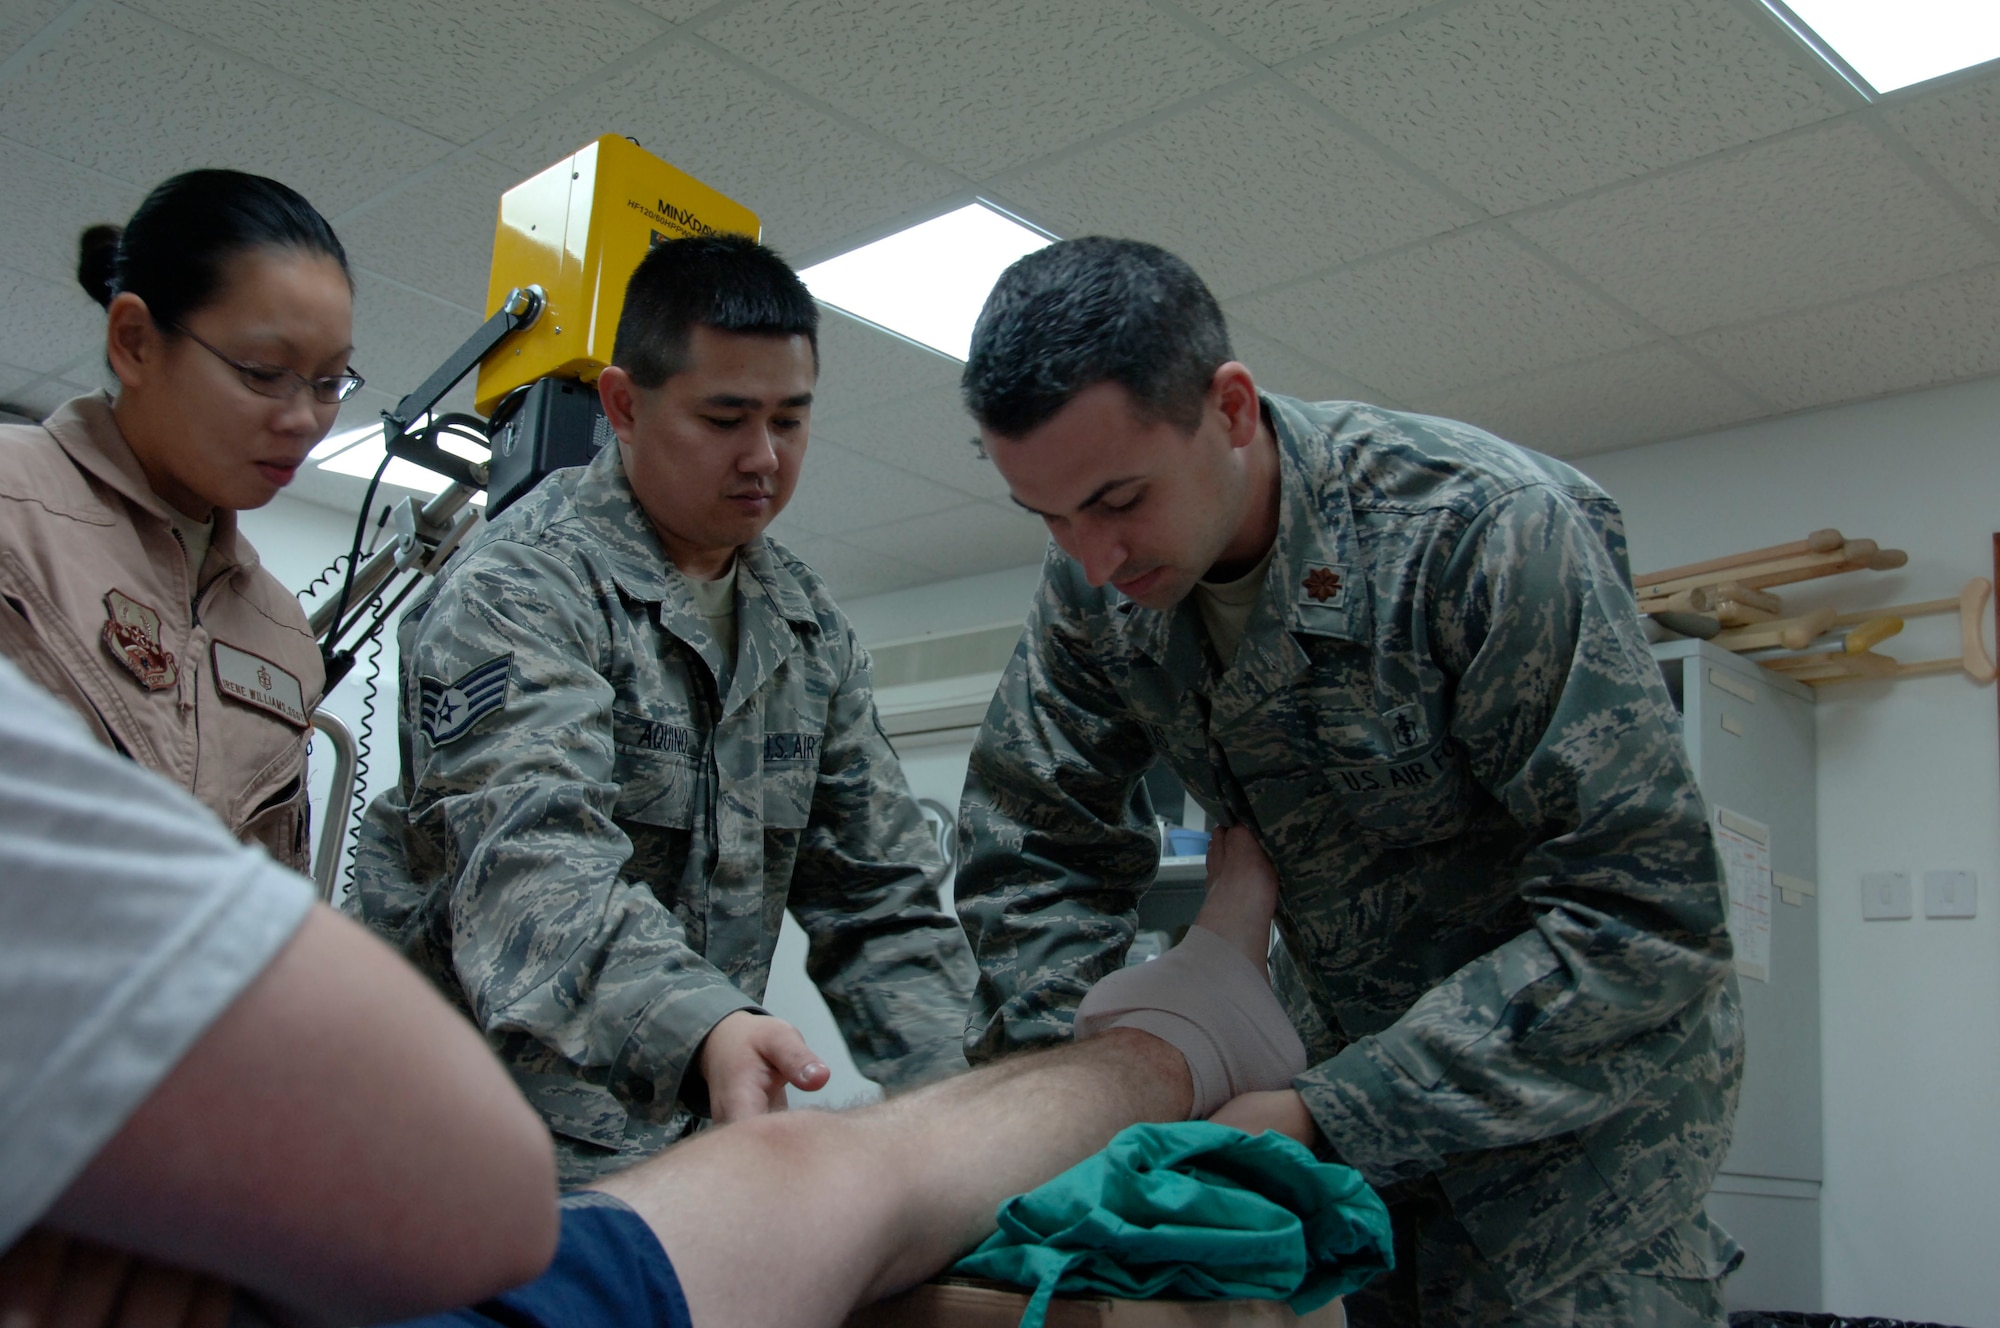 SOUTHWEST ASIA -- Maj. Stephen Titus, 380th Expeditionary Medical Group surgeon general, adjusts a cold compress on a severe ankle sprain with the assistance of Staff Sgt. Edwardson Aquino, an independent duty medical technician, while Staff Sgt. Irene Williams, also an IDMT, looks on. With an increase in mild temperatures, there has been an increase in sports related injuries at the medical clinic. Airmen are encouraged to properly warm up, stretch and wear proper protective gear when engaging in physical activities. (U.S. Air Force photo by Staff Sgt. Mike Andriacco) (Released)